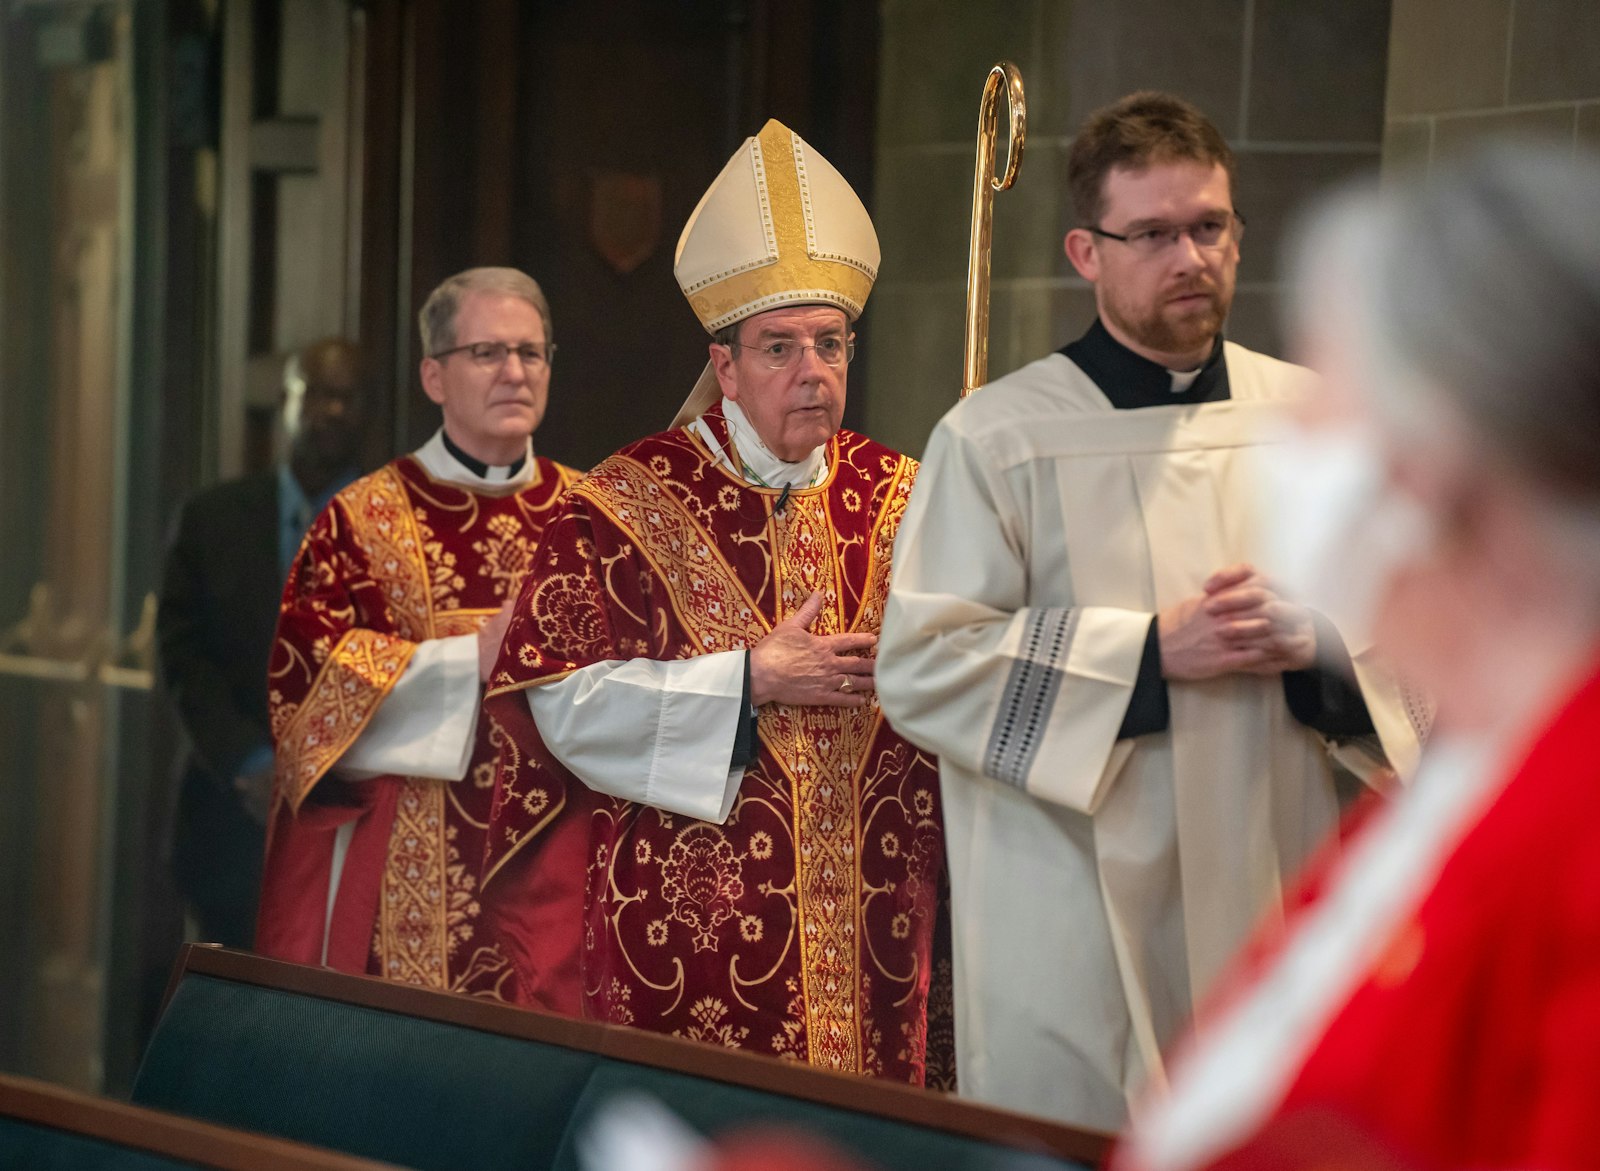 Archbishop Vigneron processes into the Cathedral of the Most Blessed Sacrament for the Pentecost Vigil on June 4. The vigil has served as an opportunity for the archbishop to summarize the Church's missionary efforts and plans for the future.